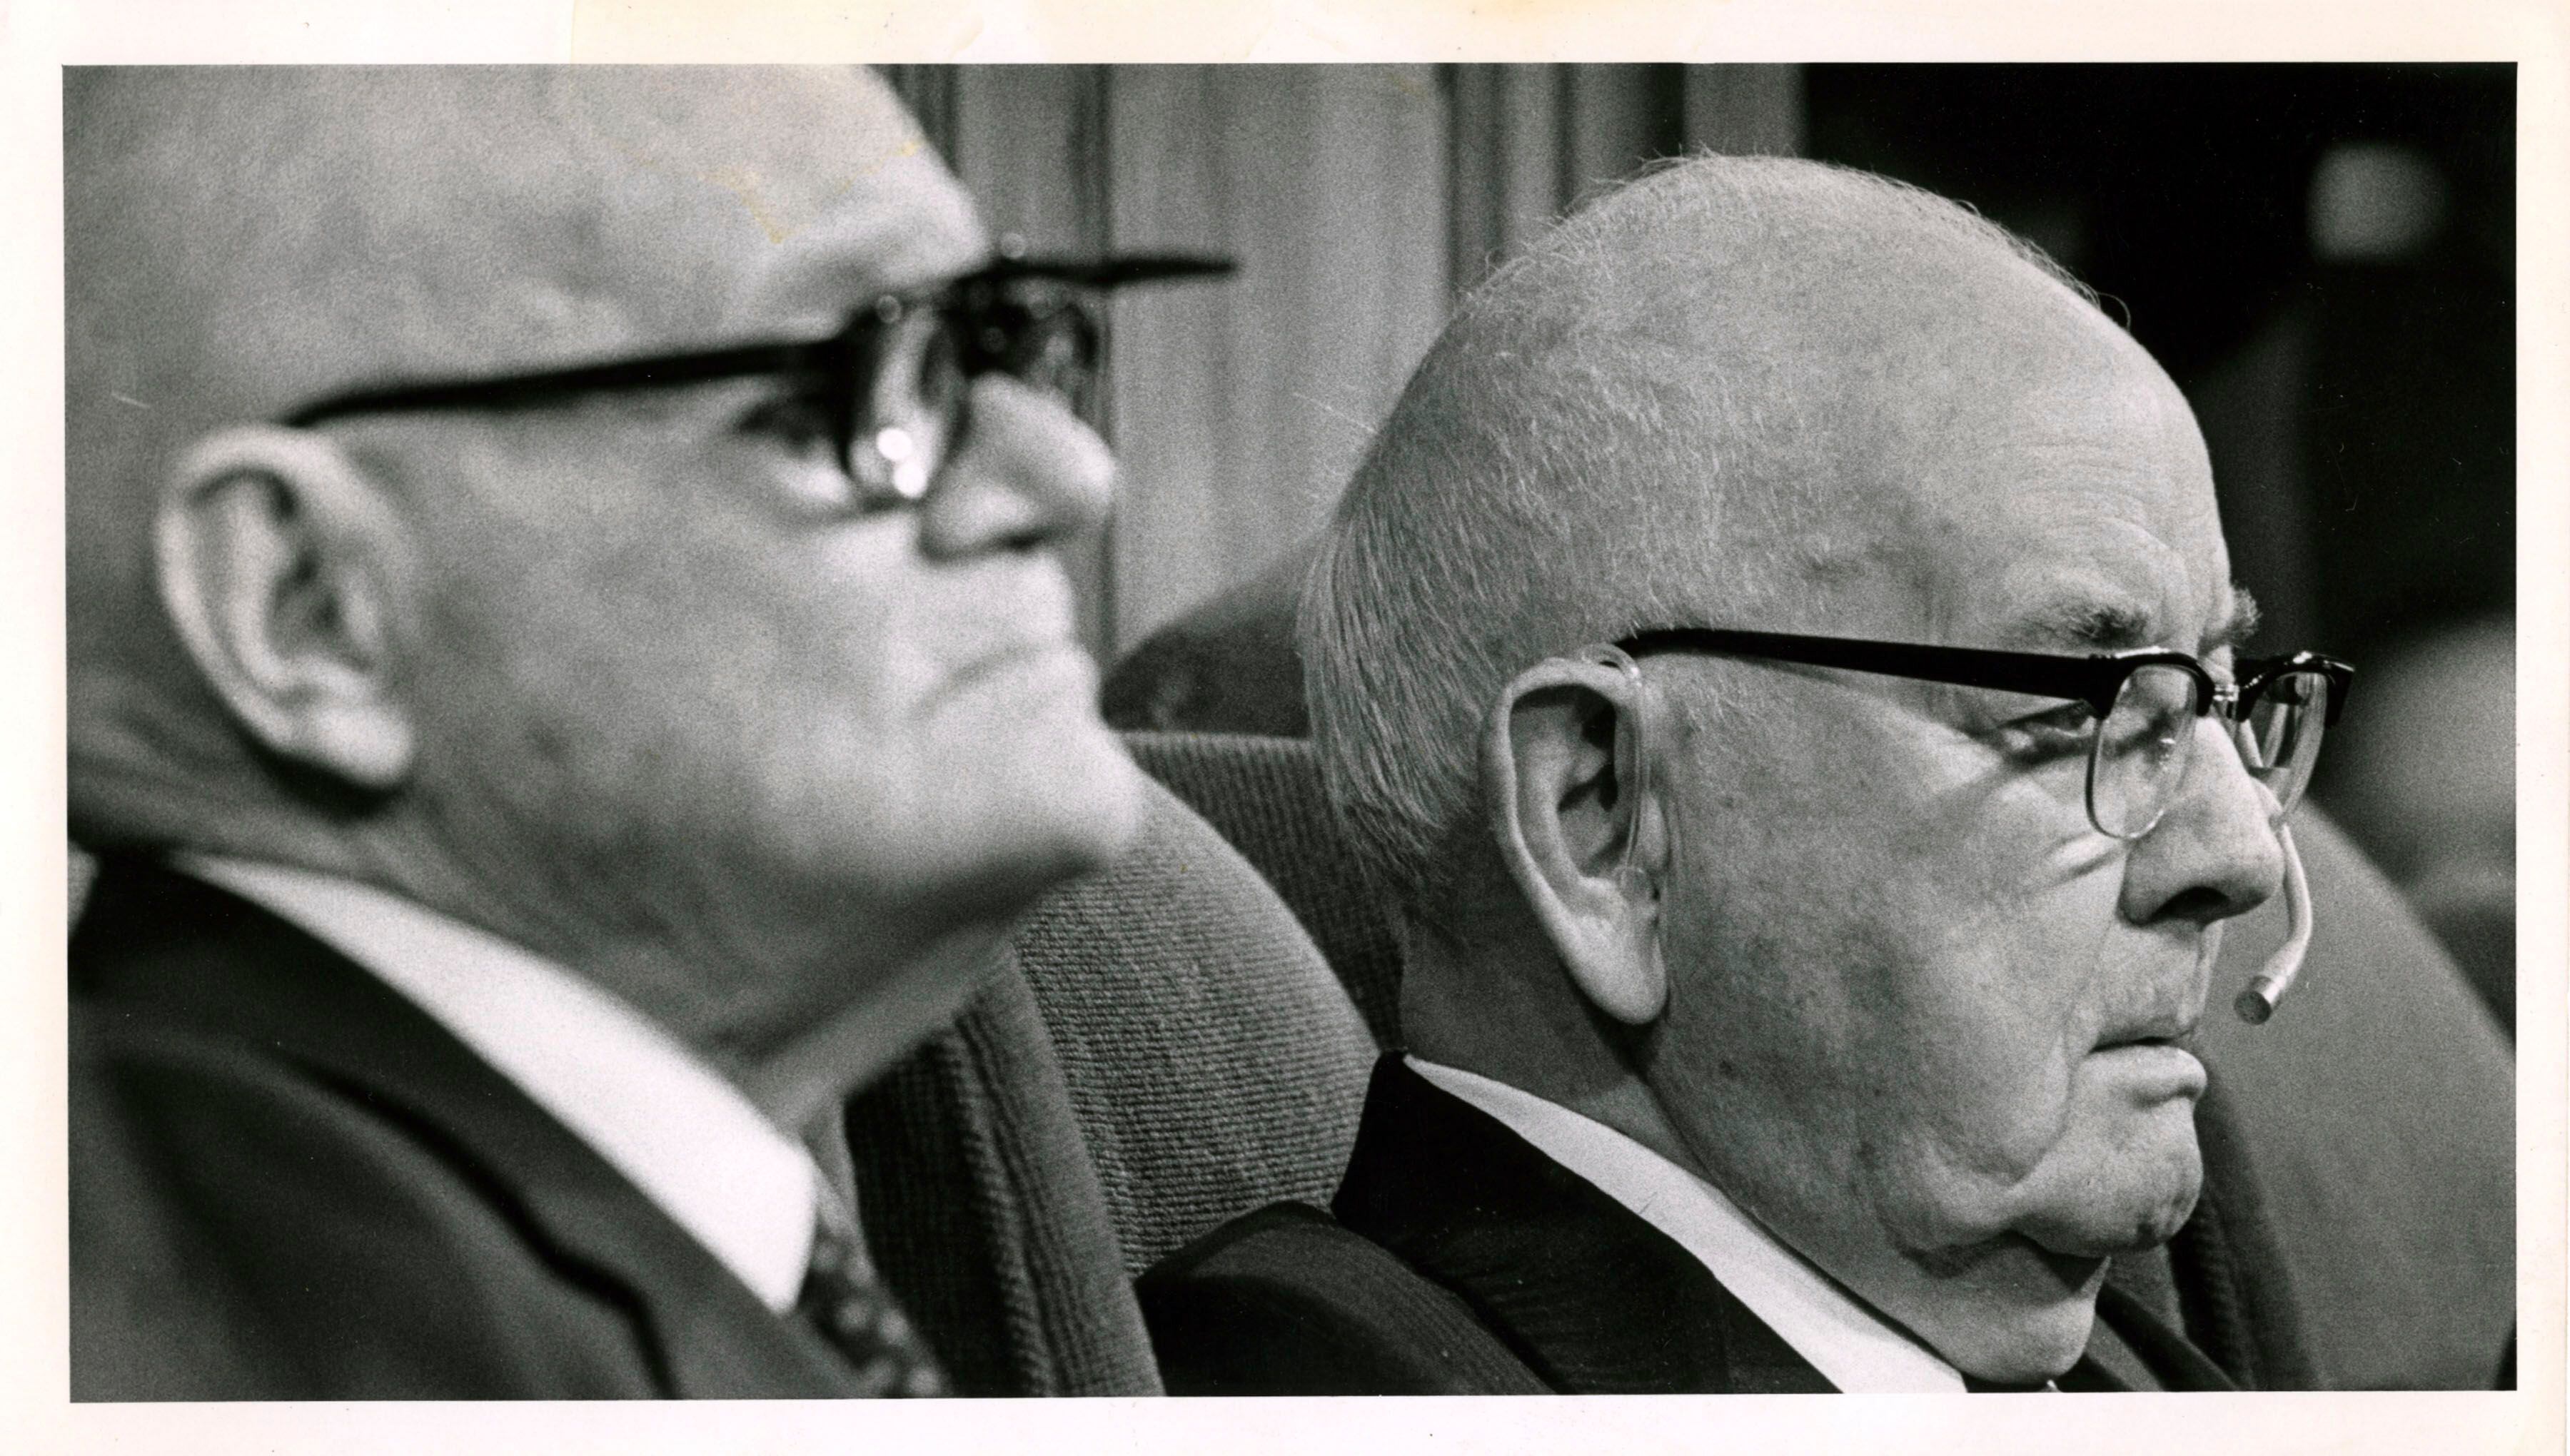 (Tribune file photo)
Spencer W. Kimball, right, president of The Church of Jesus Christ of Latter-day Saints, presides the October 1978 General Conference with one of his counselor, Marion G. Romney.